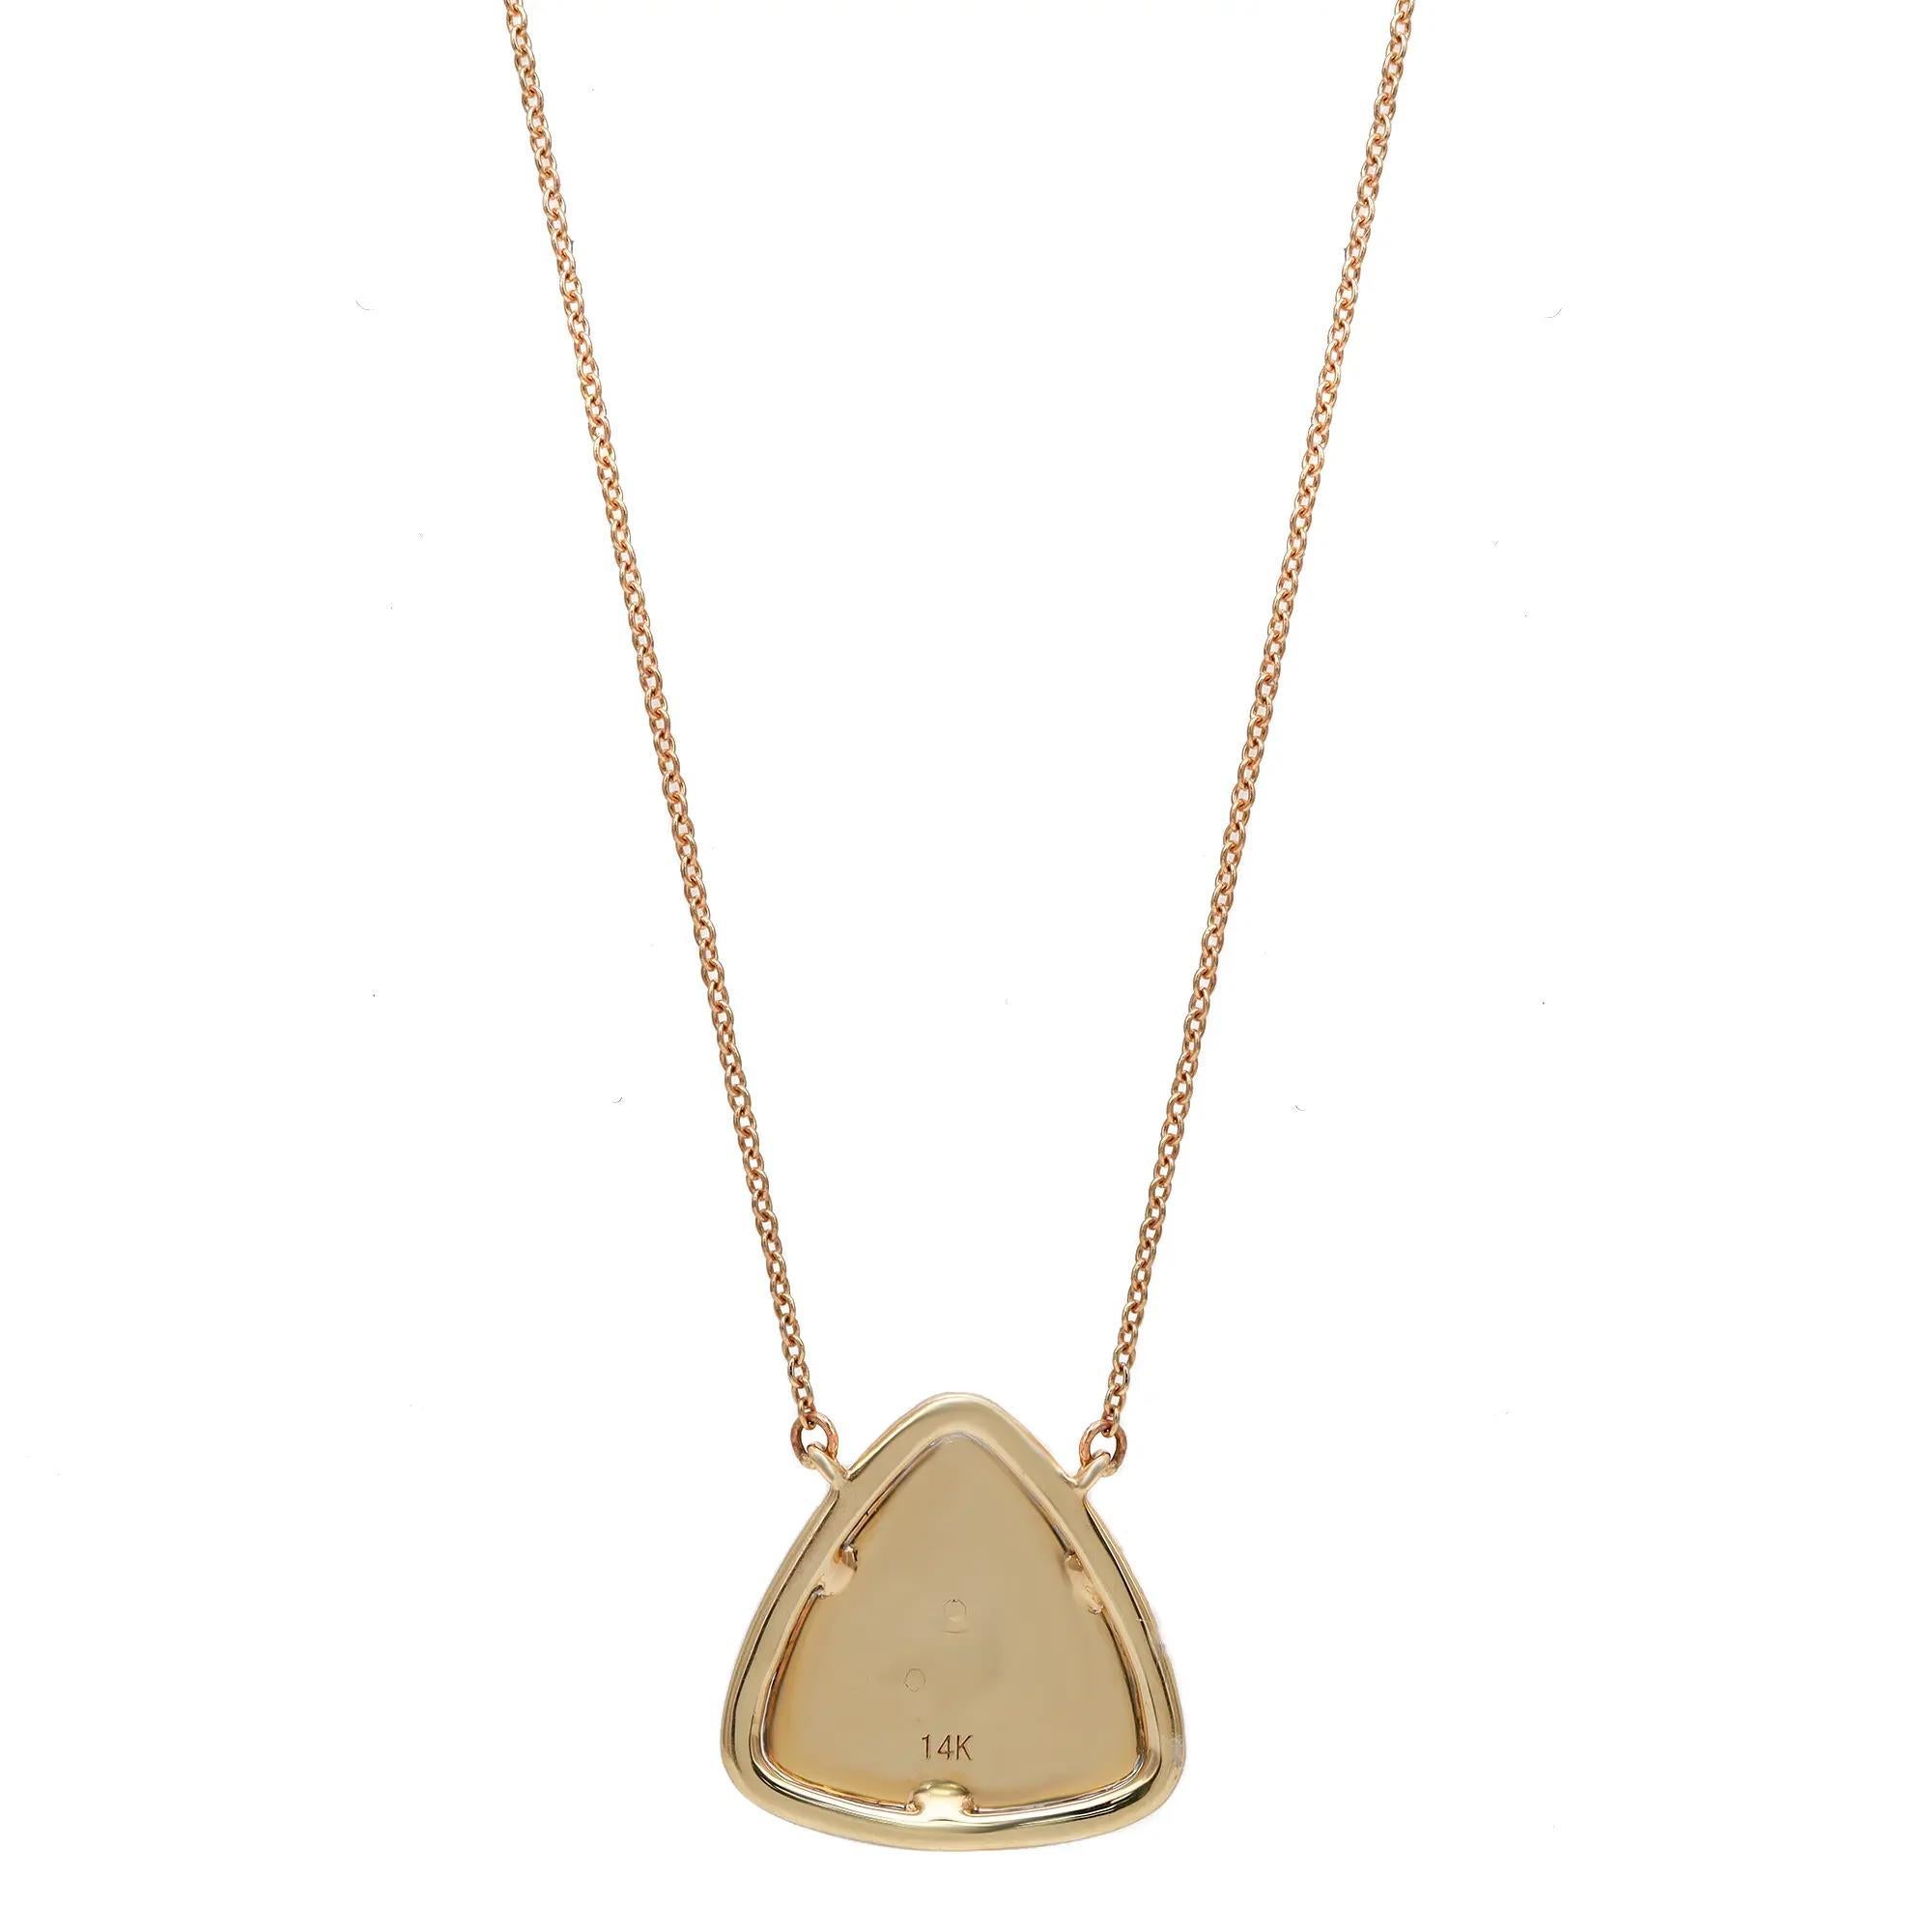 Modern Round Cut Diamond Triangular Pendant Necklace 14K Yellow Gold 18 Inches For Sale